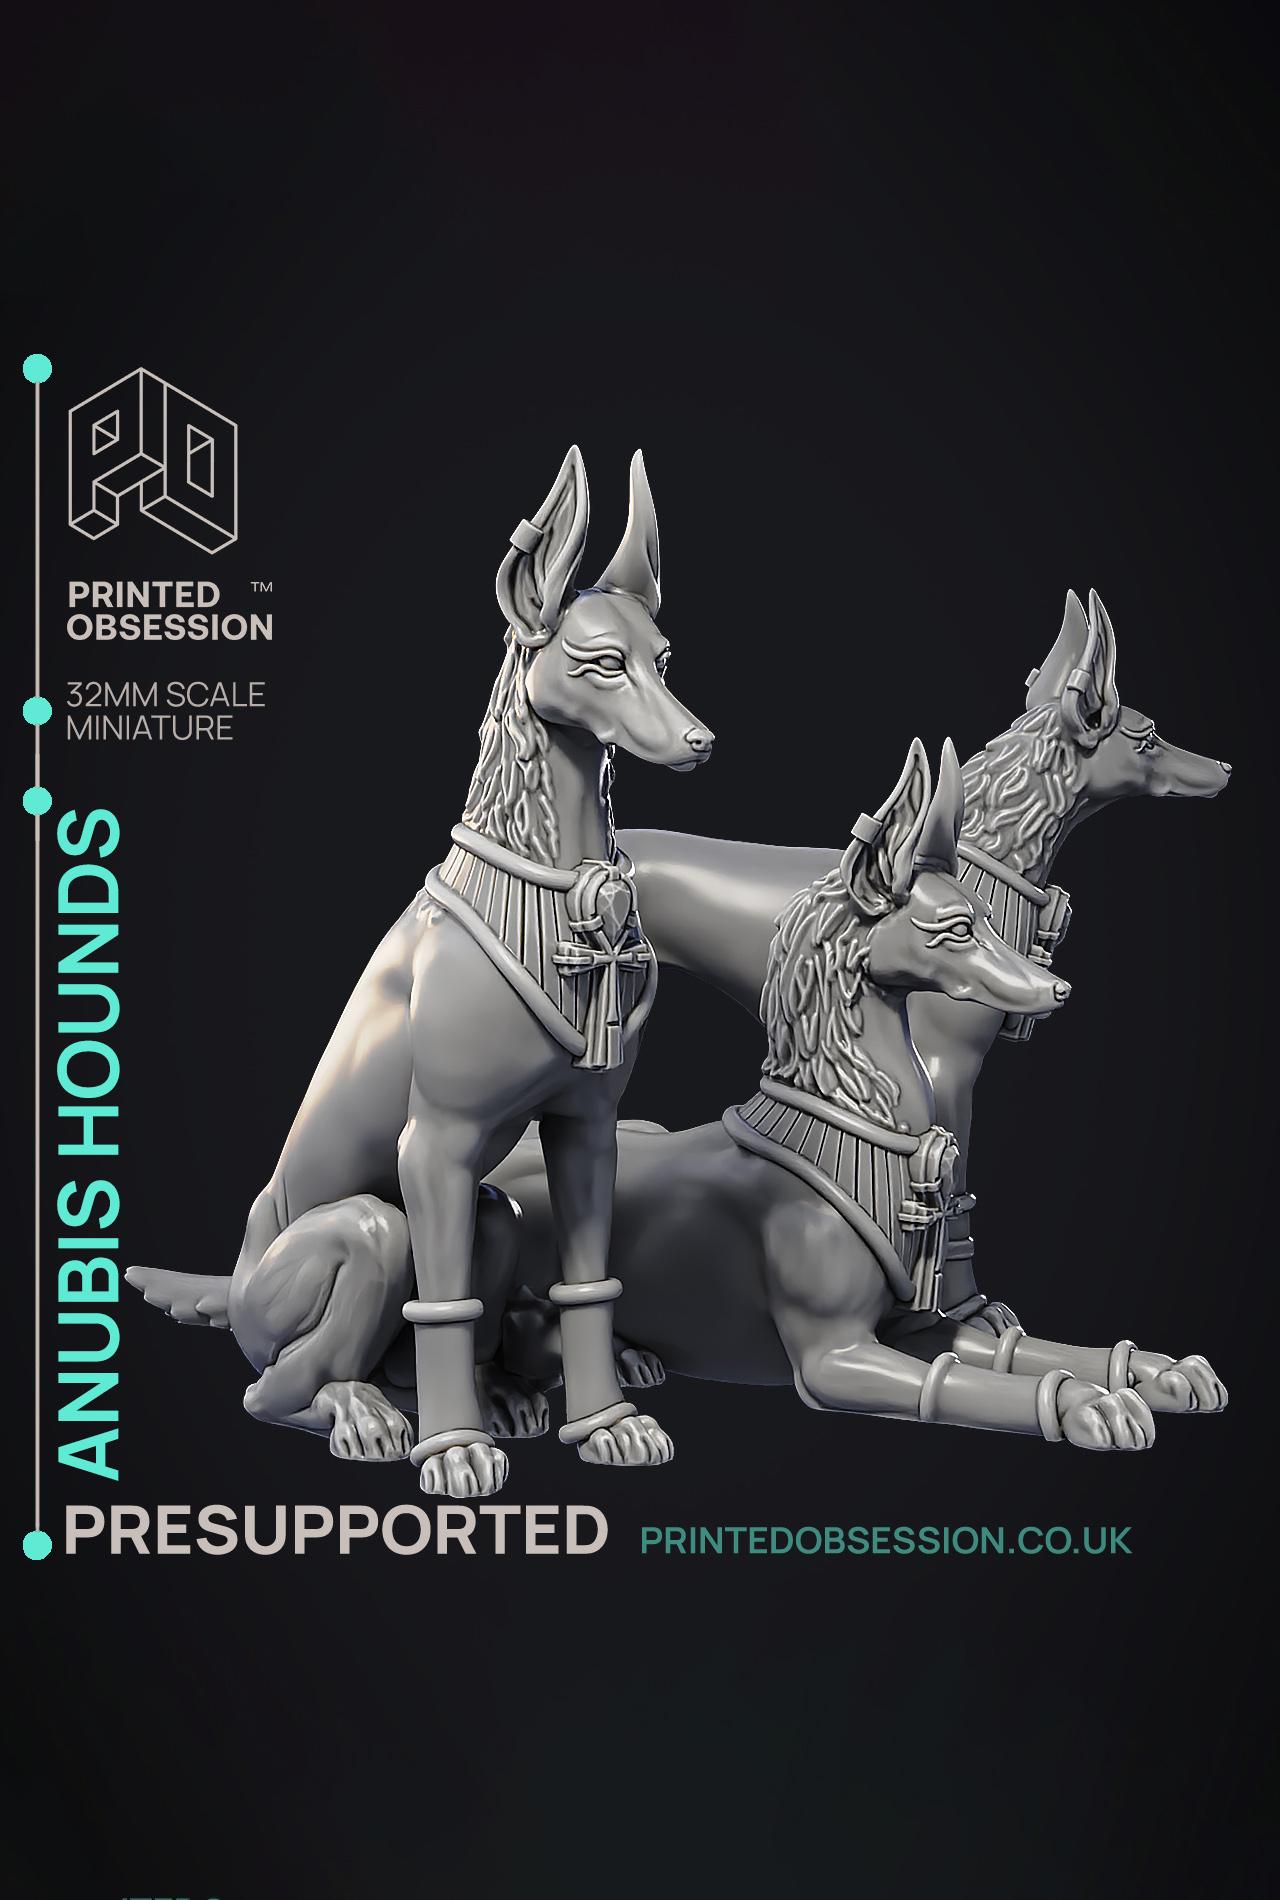 Anubis Hounds - 3 Model - Court of Anubis -  PRESUPPORTED - Illustrated and Stats - 32mm scale 3d model